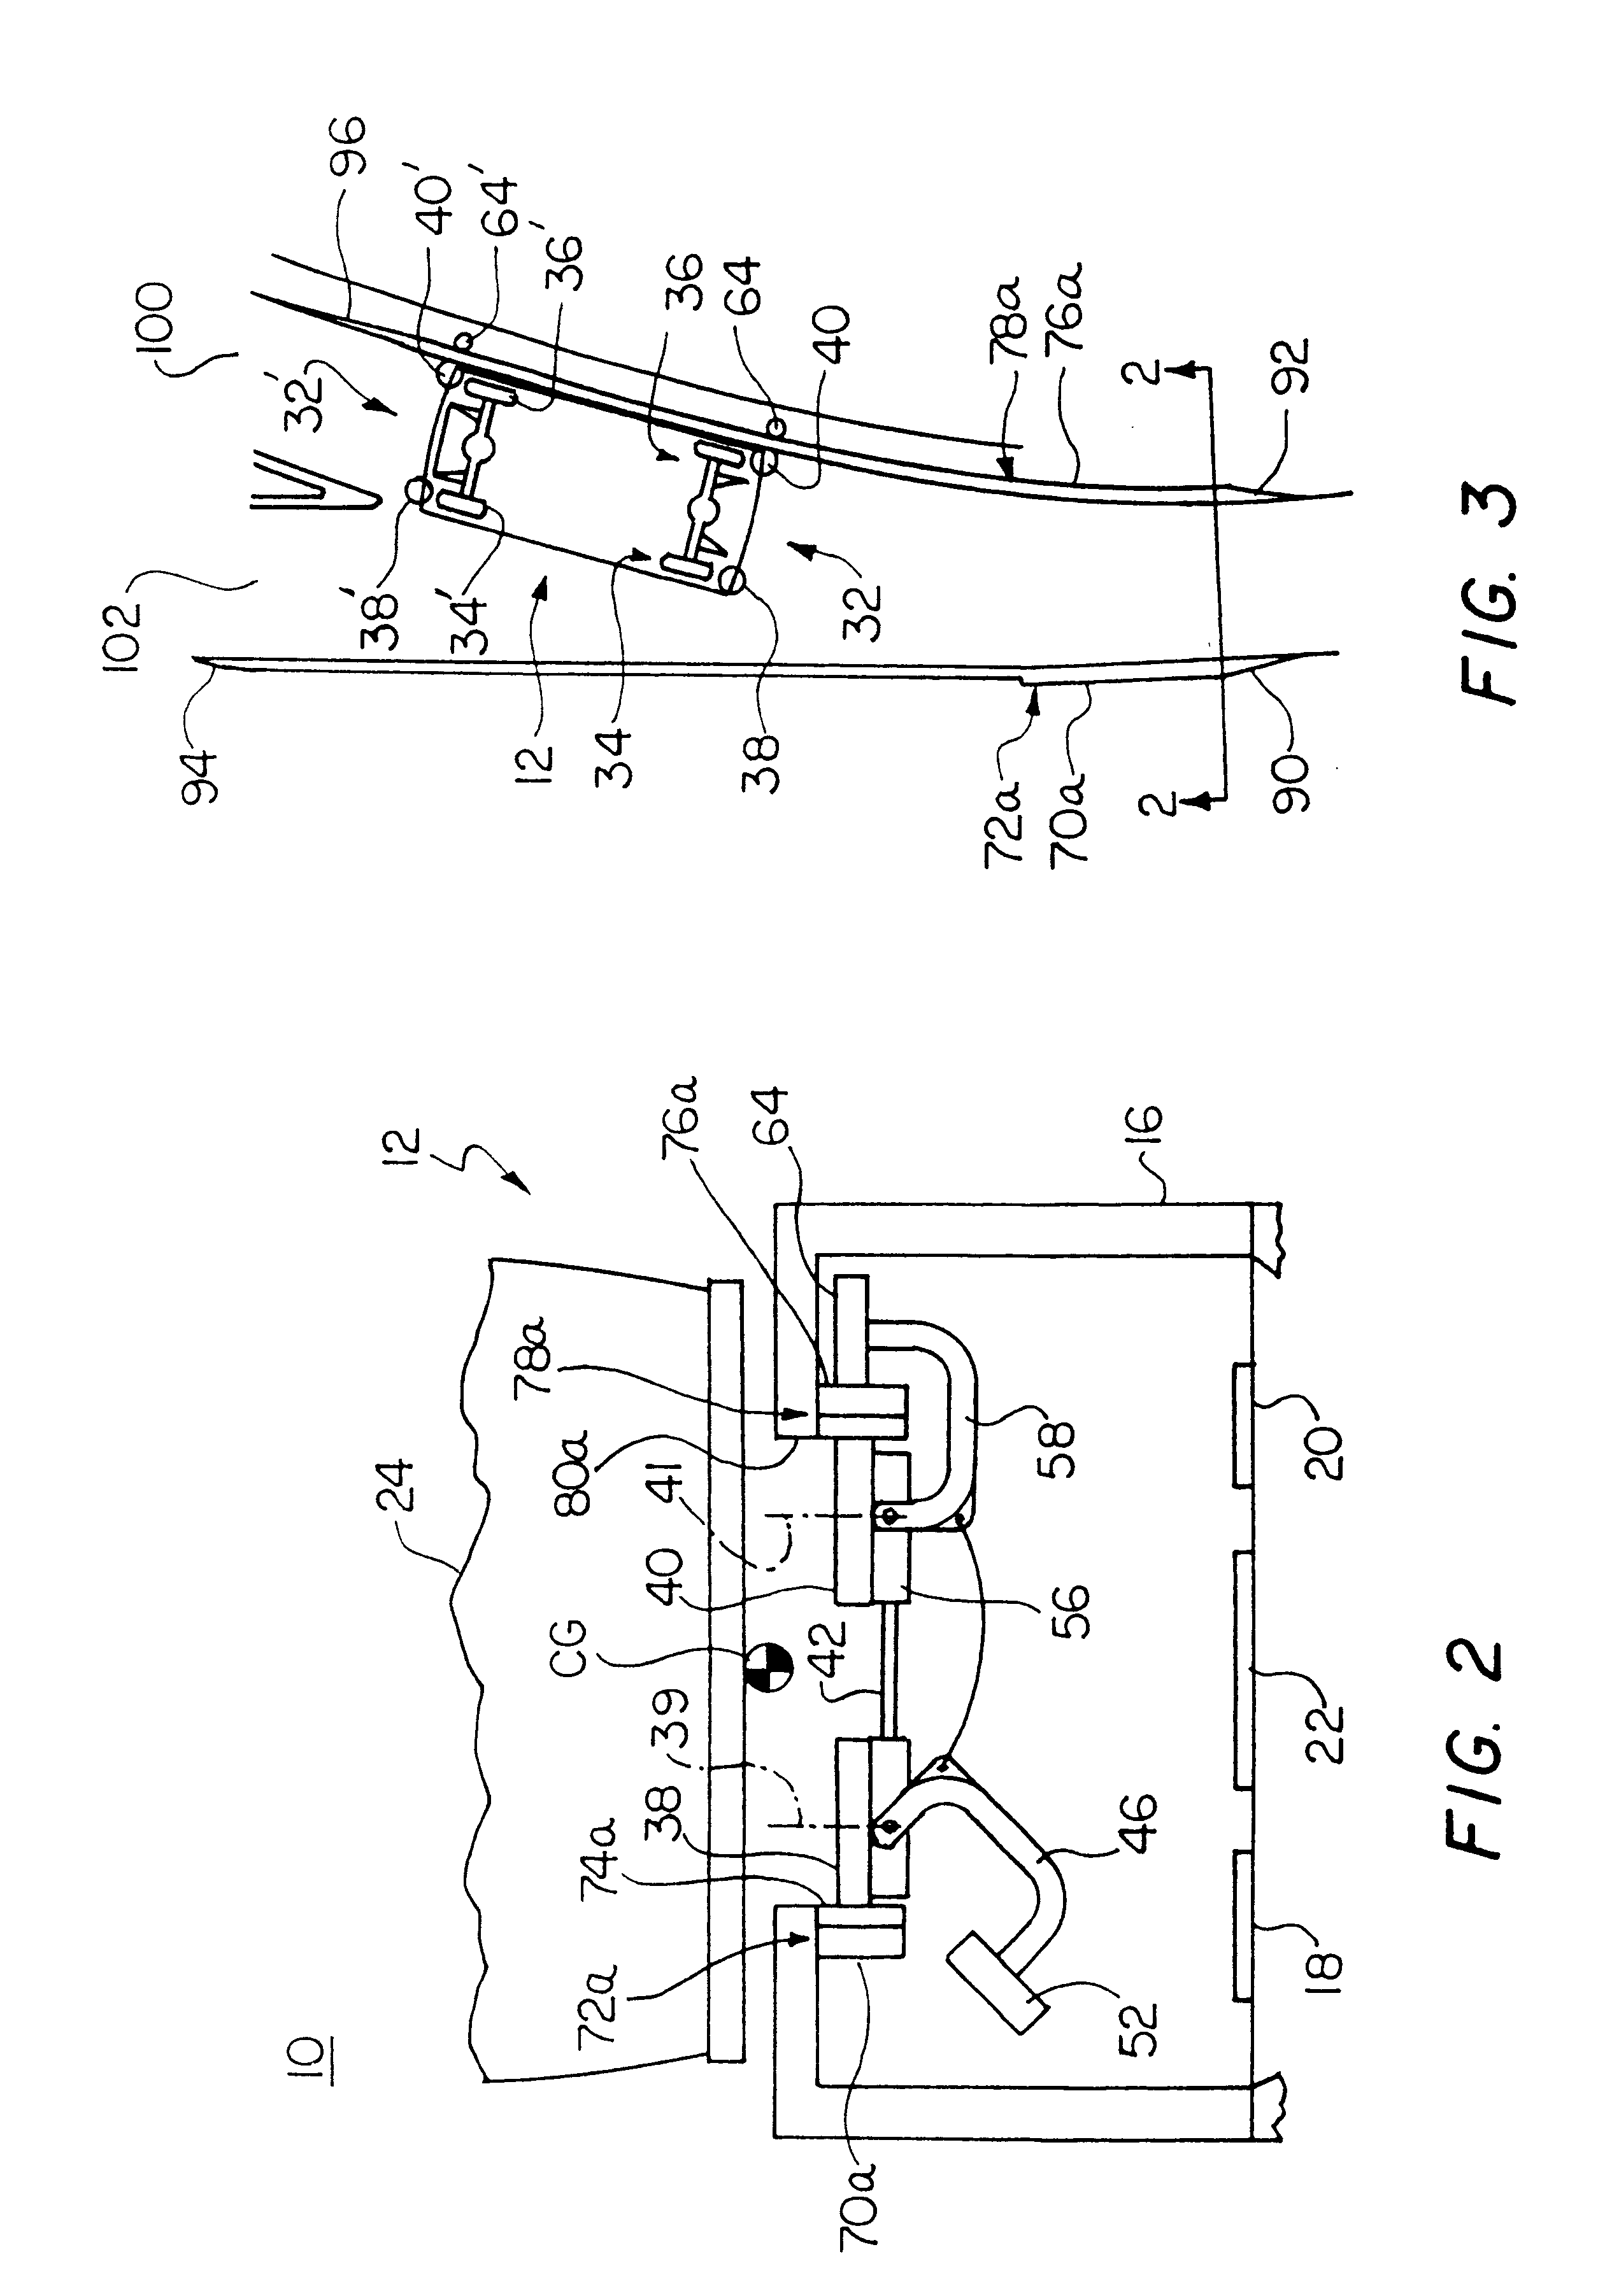 In-vehicle switch mechanism